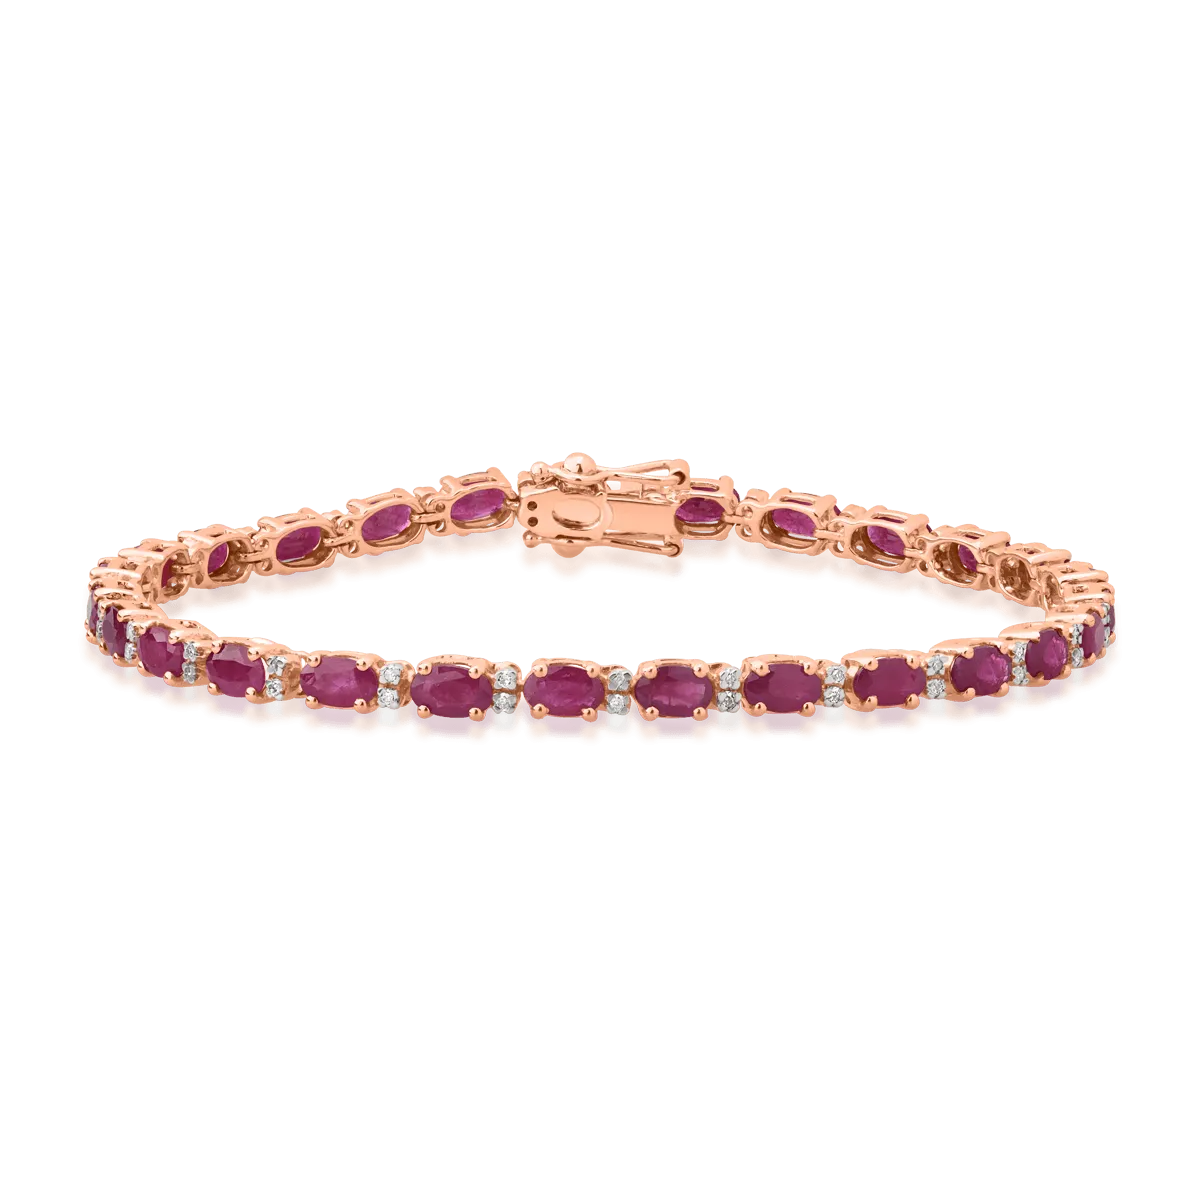 18K rose gold tennis bracelet with 7.76ct rubies and 0.34ct diamonds